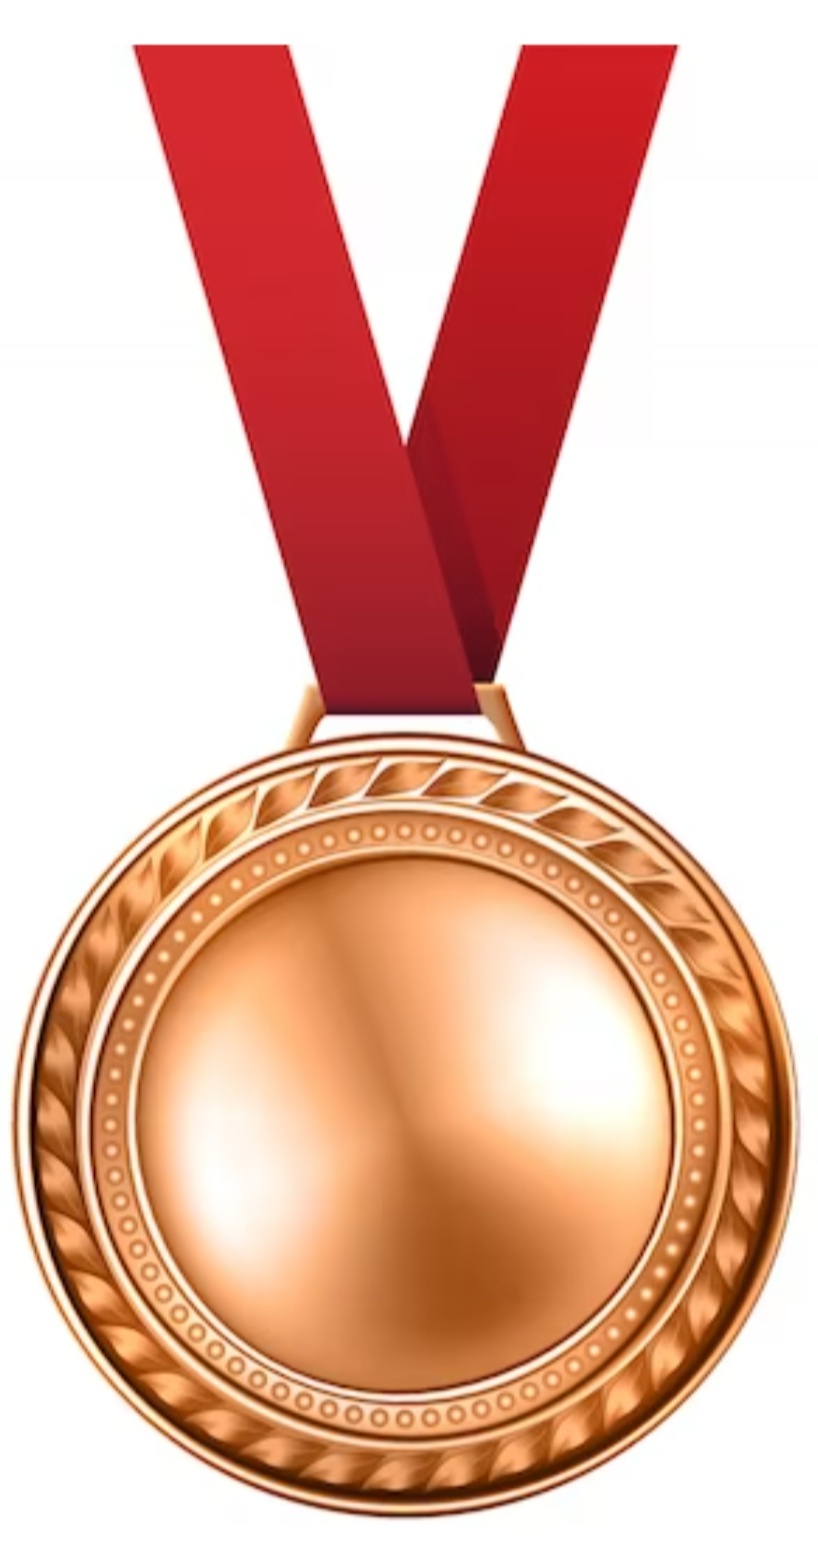 <a href="https://www.freepik.com/free-vector/golden-silver-bronze-blank-medals-hanging-blue-ribbons-isolated-white-background_25872385.htm#query=bronze%20medal&position=1&from_view=keyword&track=ais&uuid=3a6a3323-acb2-4cc7-b104-24d5742957c0">Image by studio4rt</a> on Freepik